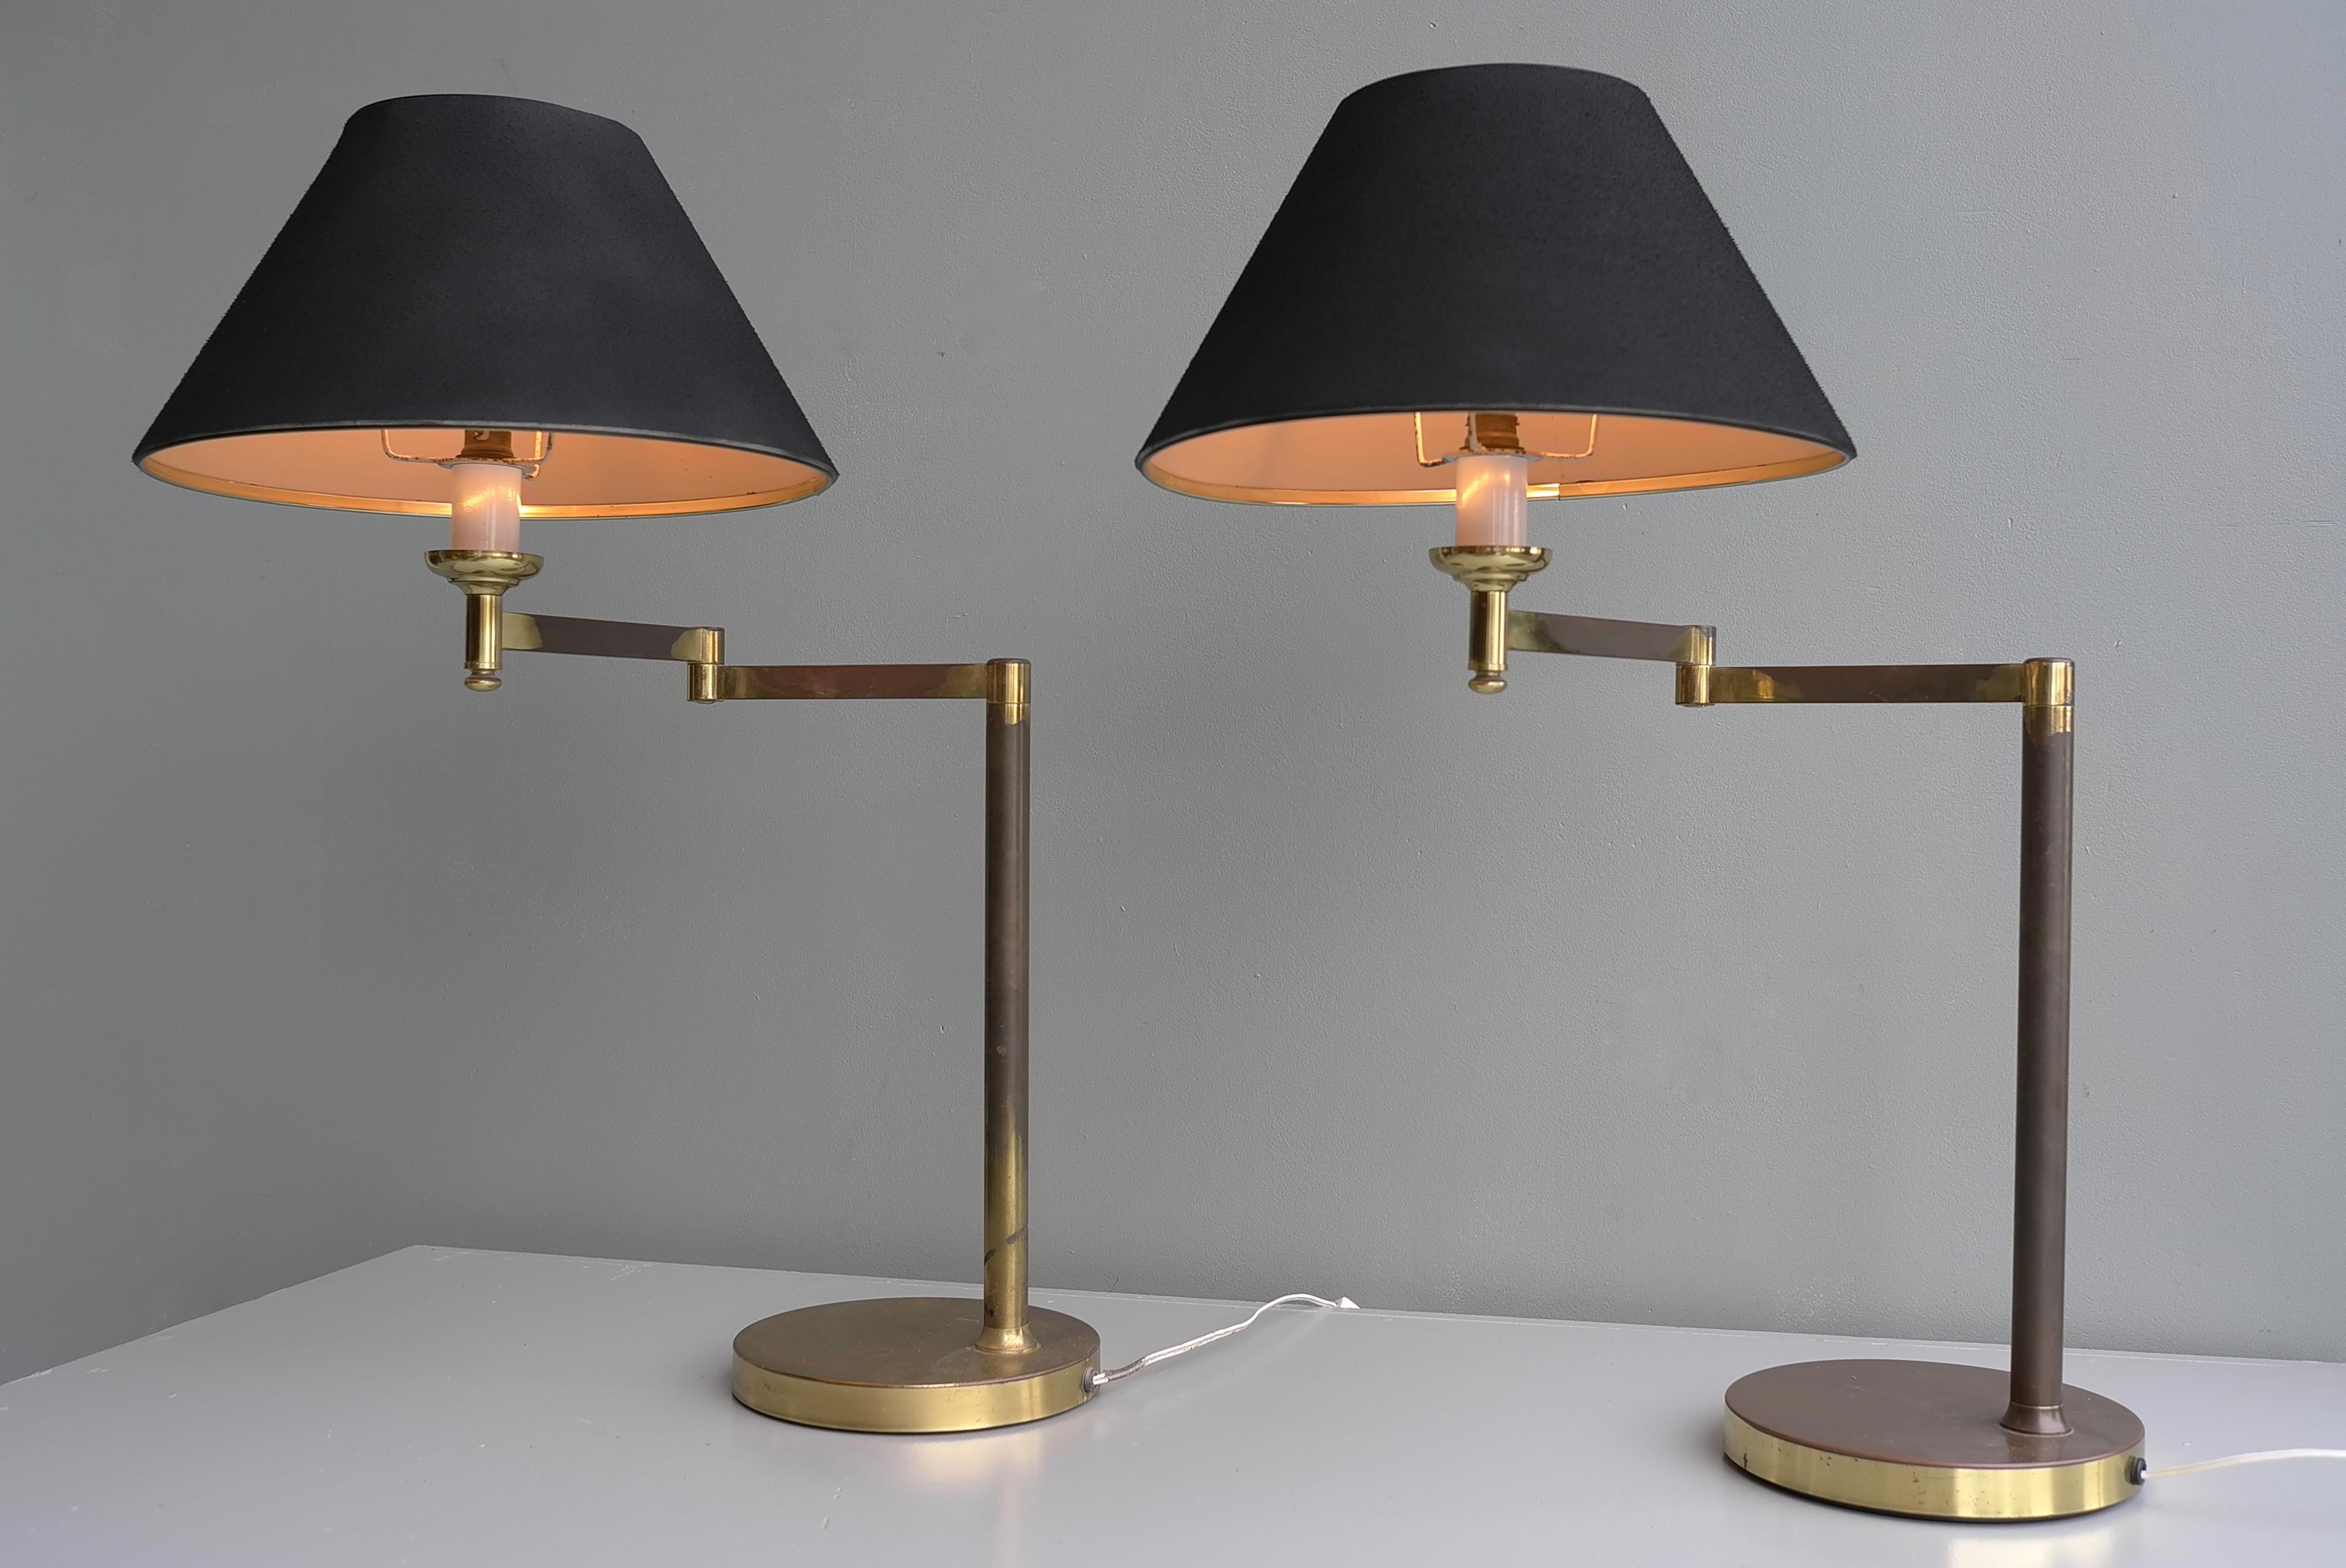 Scandinavian swing arm Mid-Century Modern table lamps in Brass
Would fit perfect on your side table or desk. Lovely Patina to the Brass.


Diameter shade 36cm, height 69, width when arm is stretched 58cm.